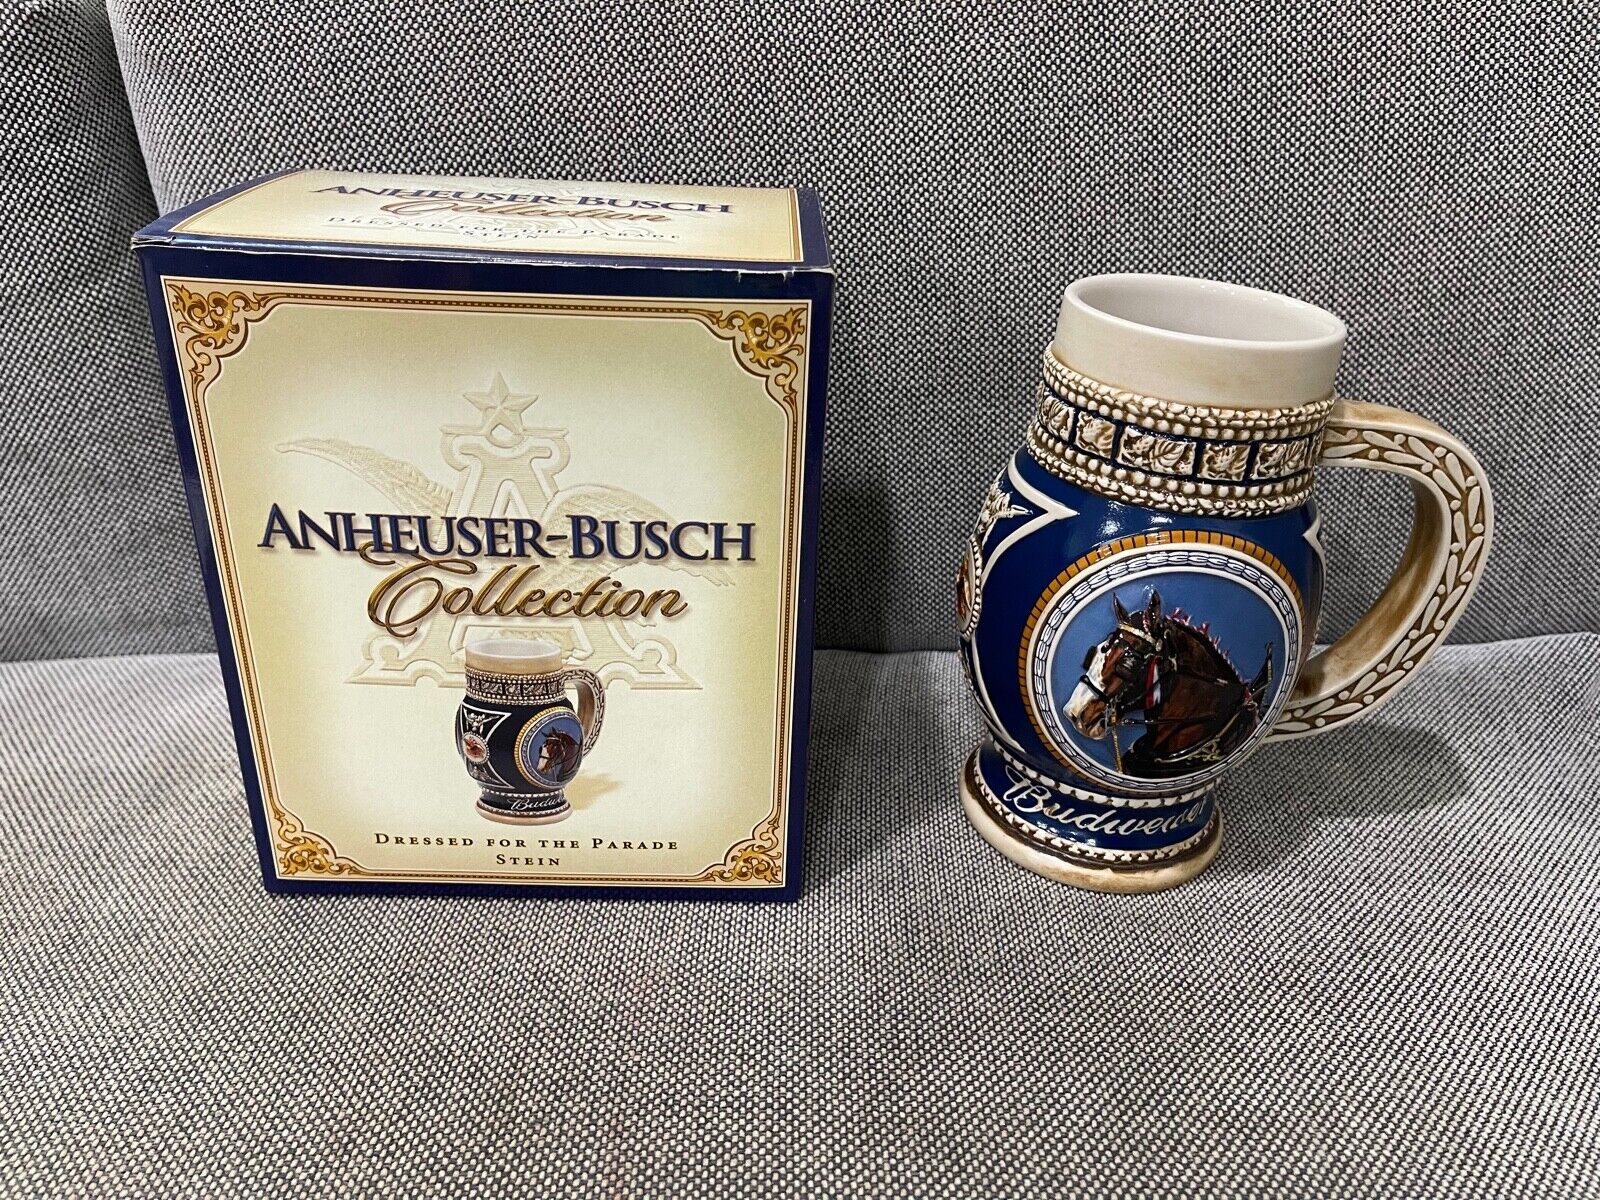 2005 Anheuser Busch Dressed for the Parade Beer Stein w/ Original Box